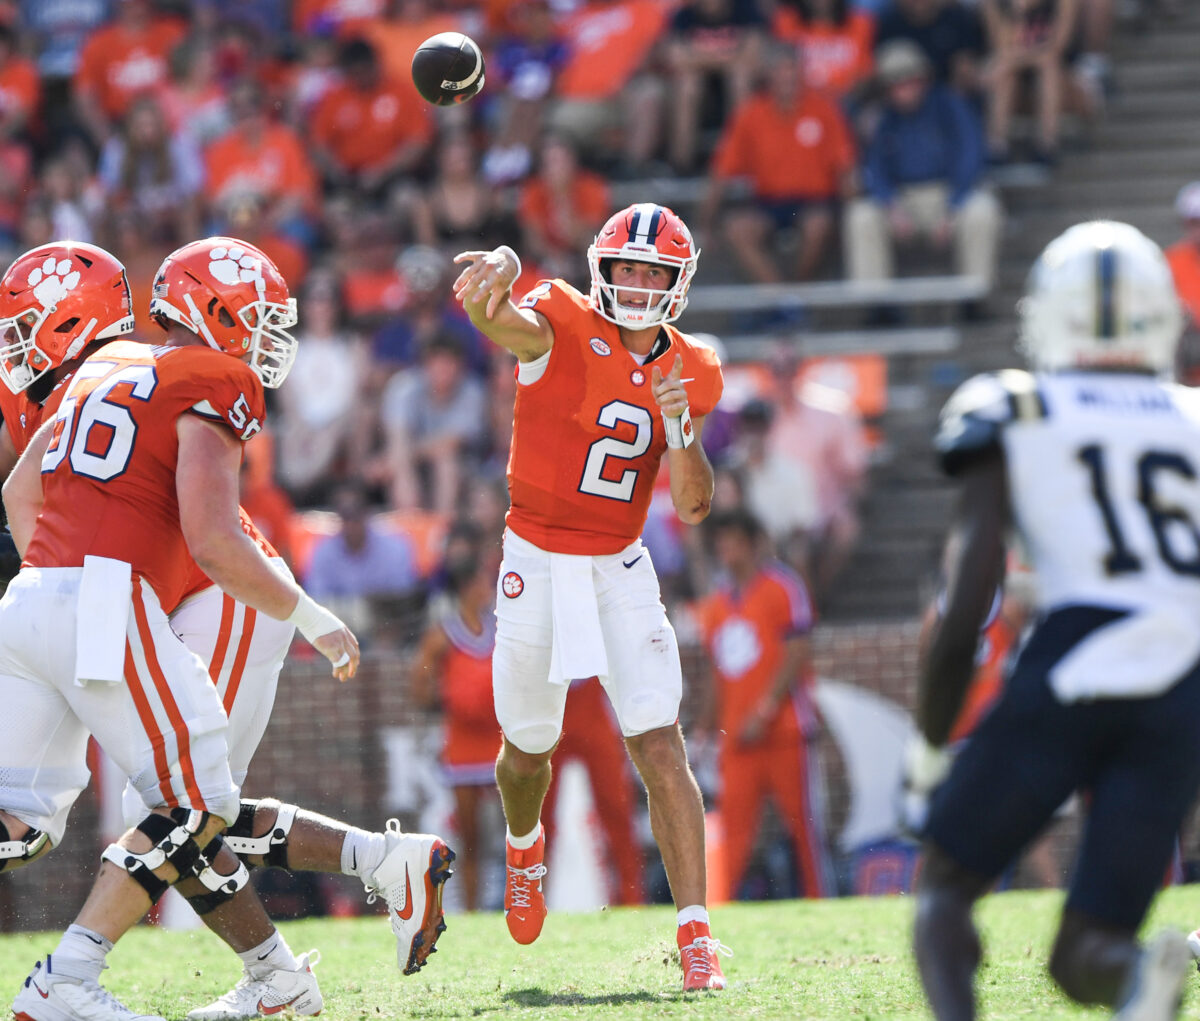 College Football News predicts an upset win for Clemson over Florida State in Week 4